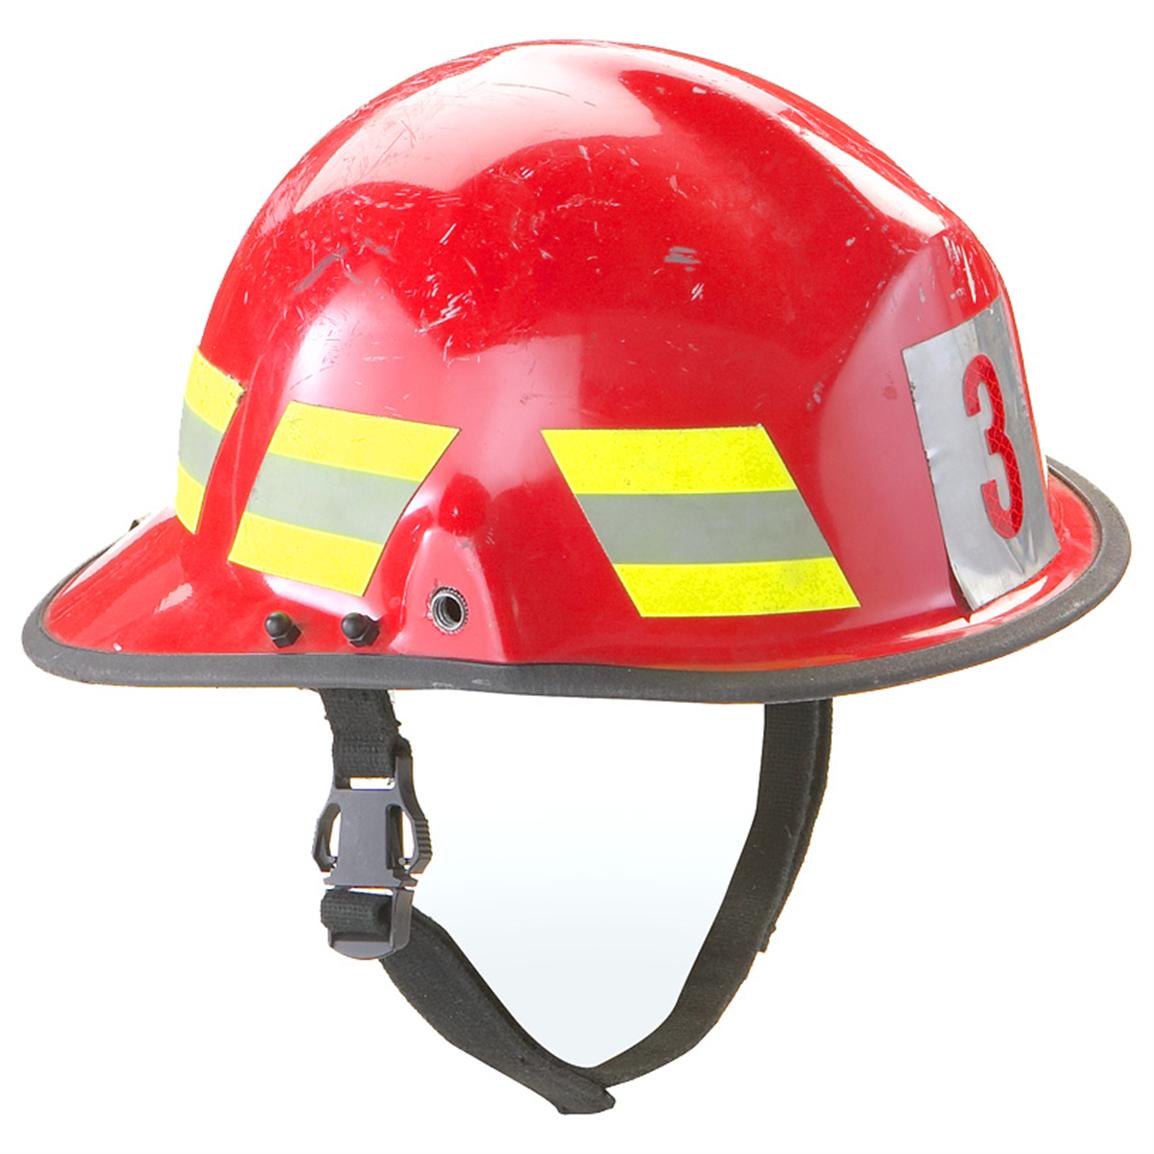 0 Result Images of Different Types Of Firefighter Helmet - PNG Image ...